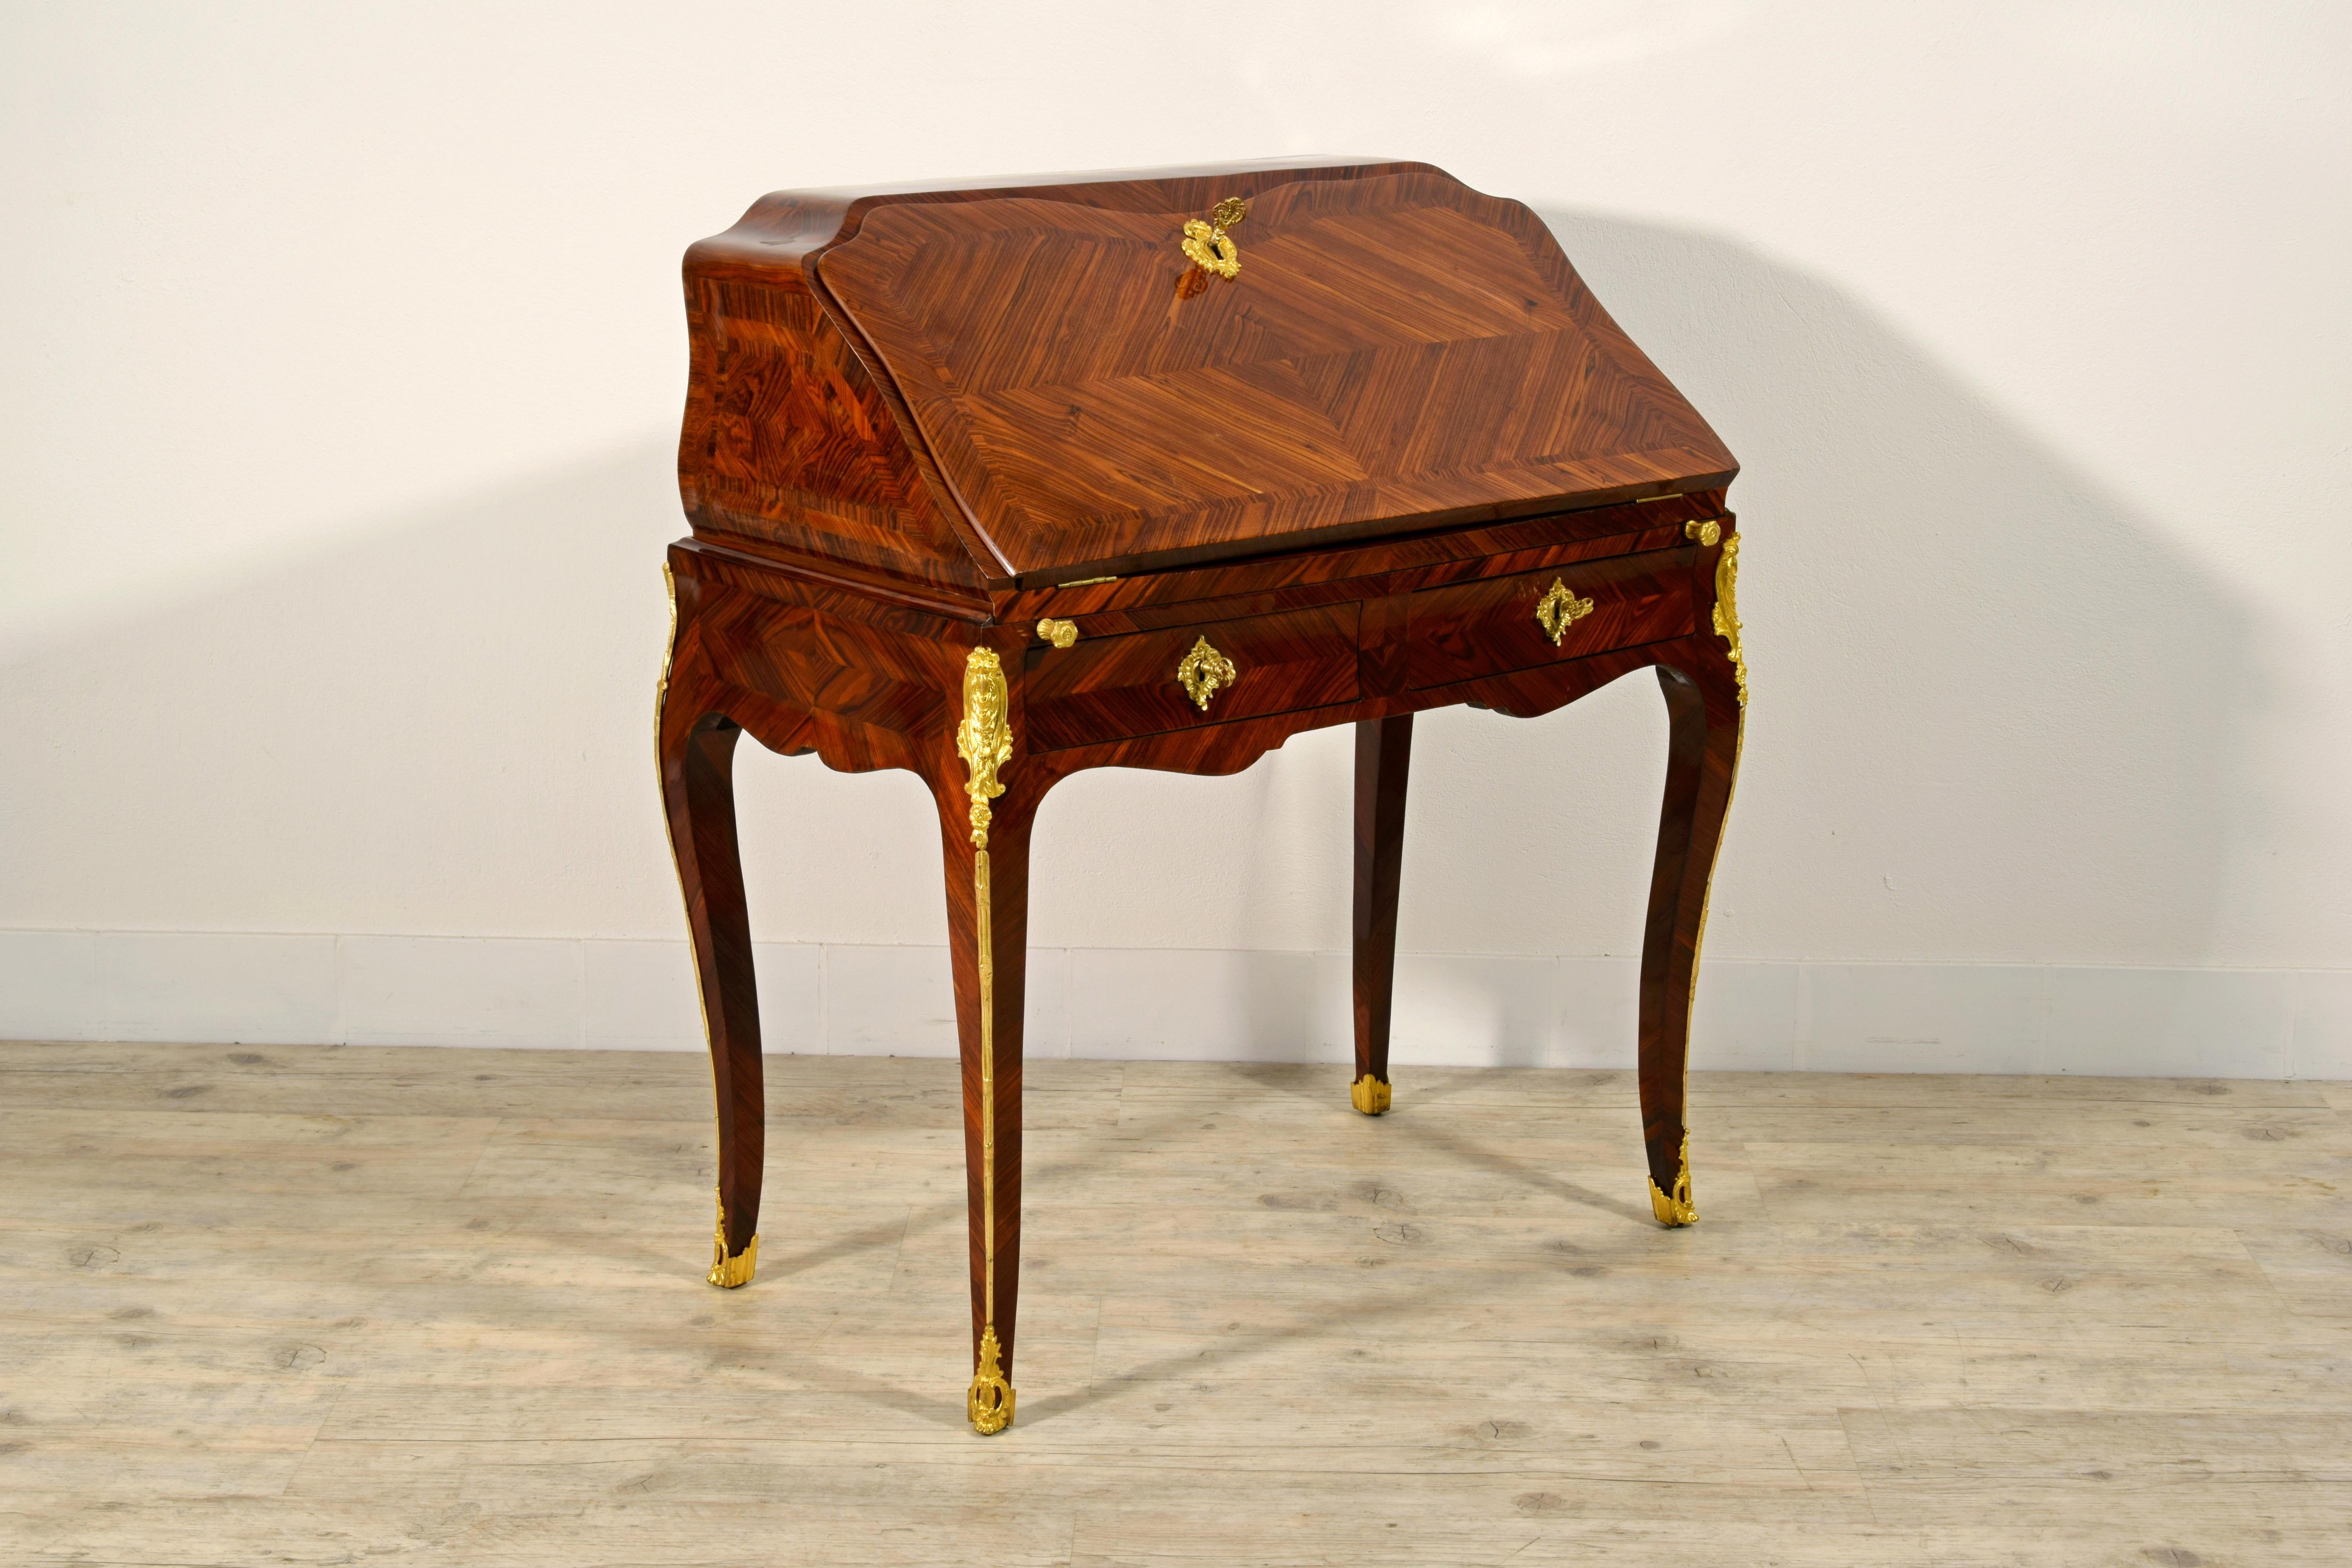 18th Century, Franch Louis XV Wood Flap Writing Desk 
Measures: cm H 94 x W 83,5 x D 46; D with the open panel 82 cm, H of the desk top 69,5 cm

This elegant desk was made in France in the mid-eighteenth century, in the Louis XV era. The cabinet is